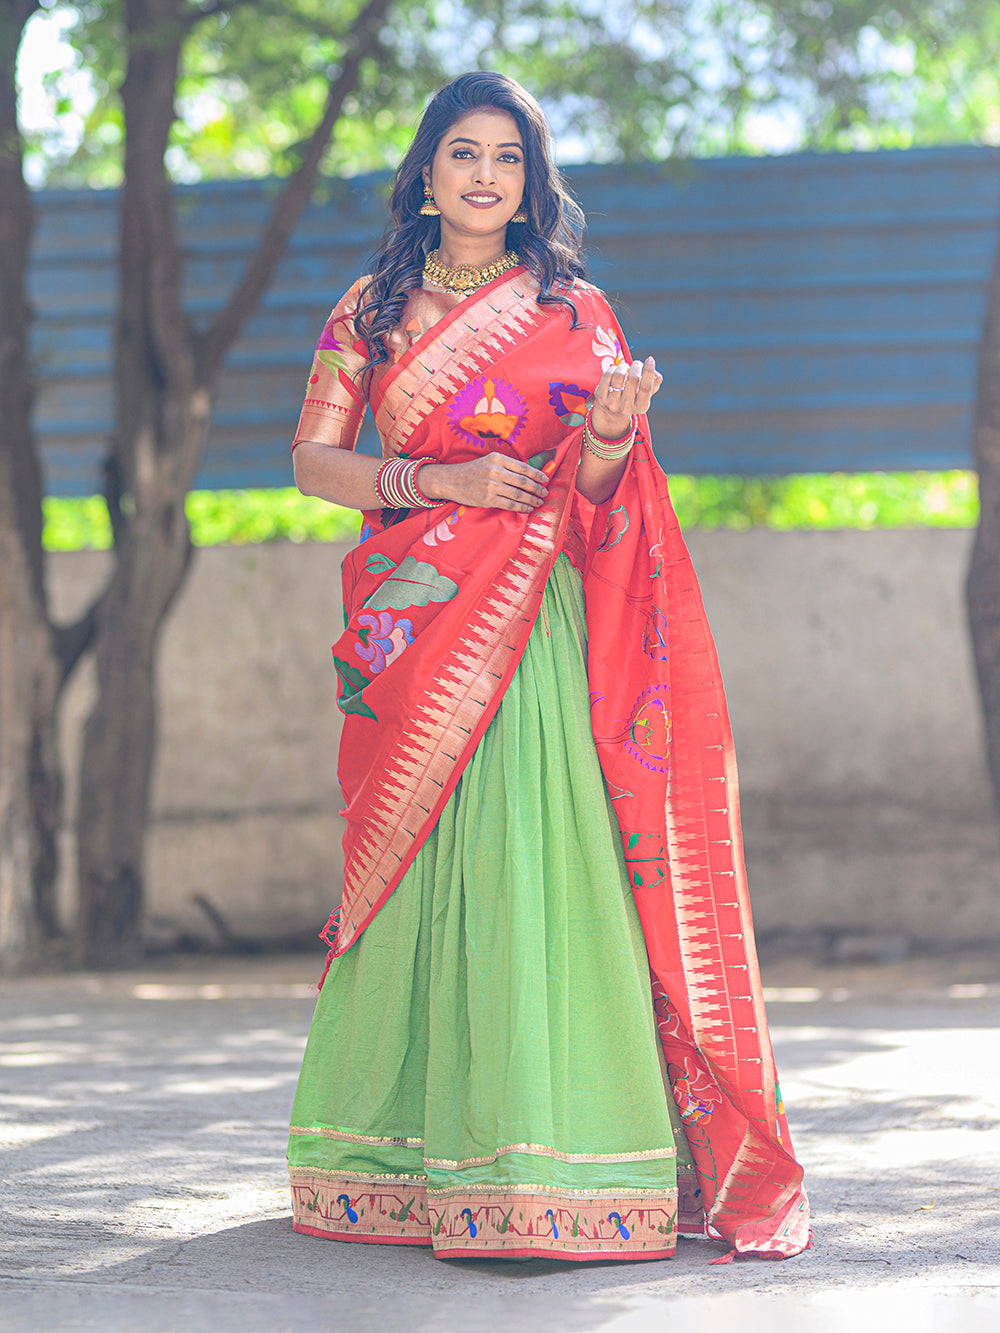 Half Saree Archives - Page 3 of 5 - Women Clothing Store